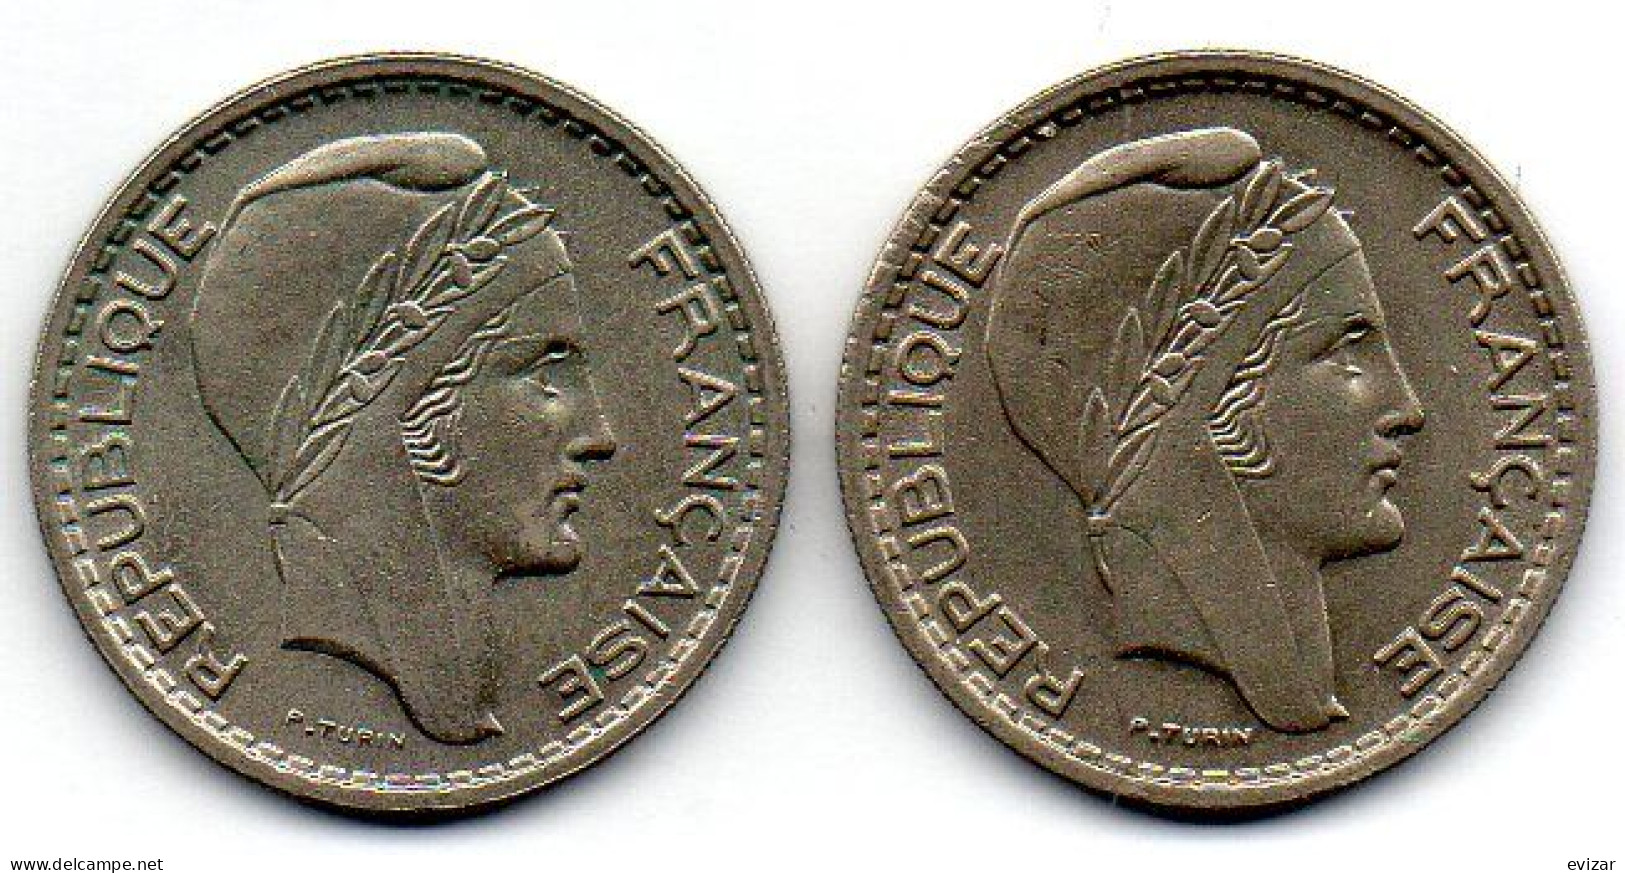 FRANCE, Set Of Two Coins 10 Francs, Copper-Nickel, Year 1948, 1948-B, KM # 909.1, 909.2 - 10 Francs